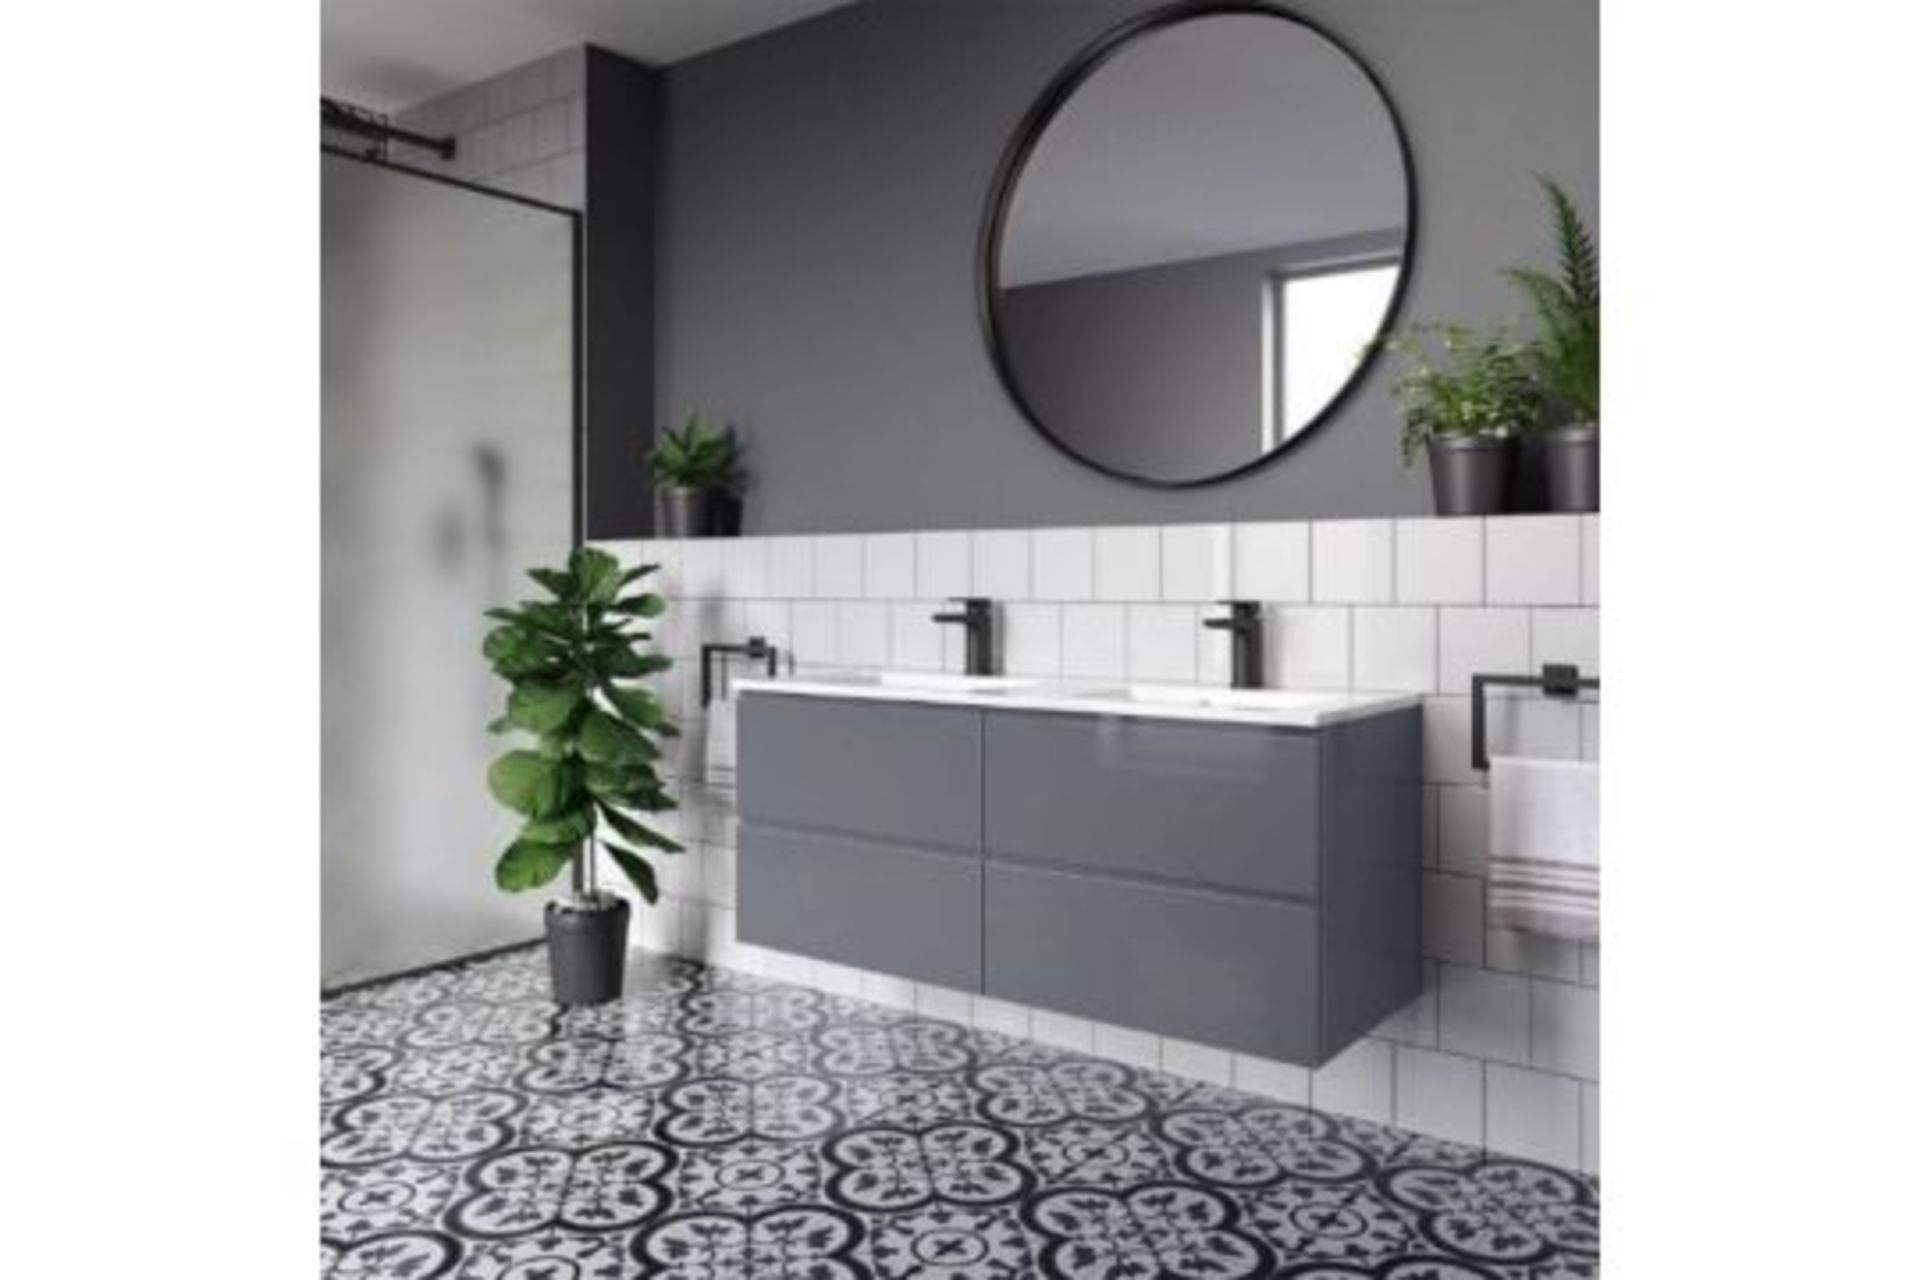 NEW 1200mm Trevia High Gloss Grey Double Basin Cabinet - Wall Hung. Comes complete with basin.